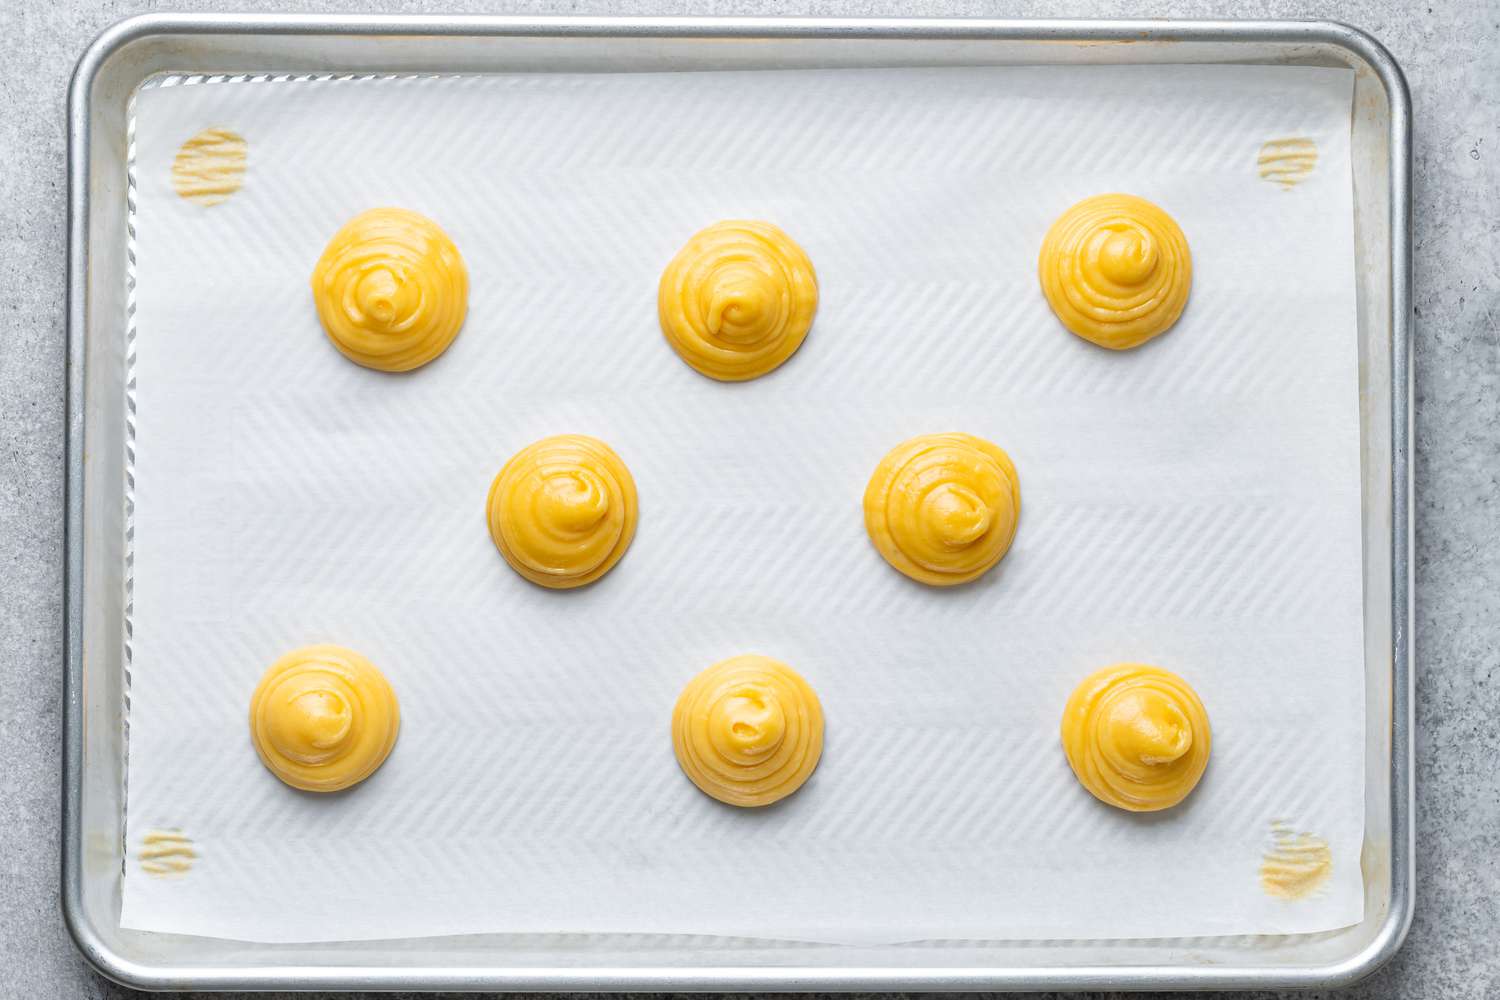 Small rounds of piped choux dough on a parchment-lined baking sheet